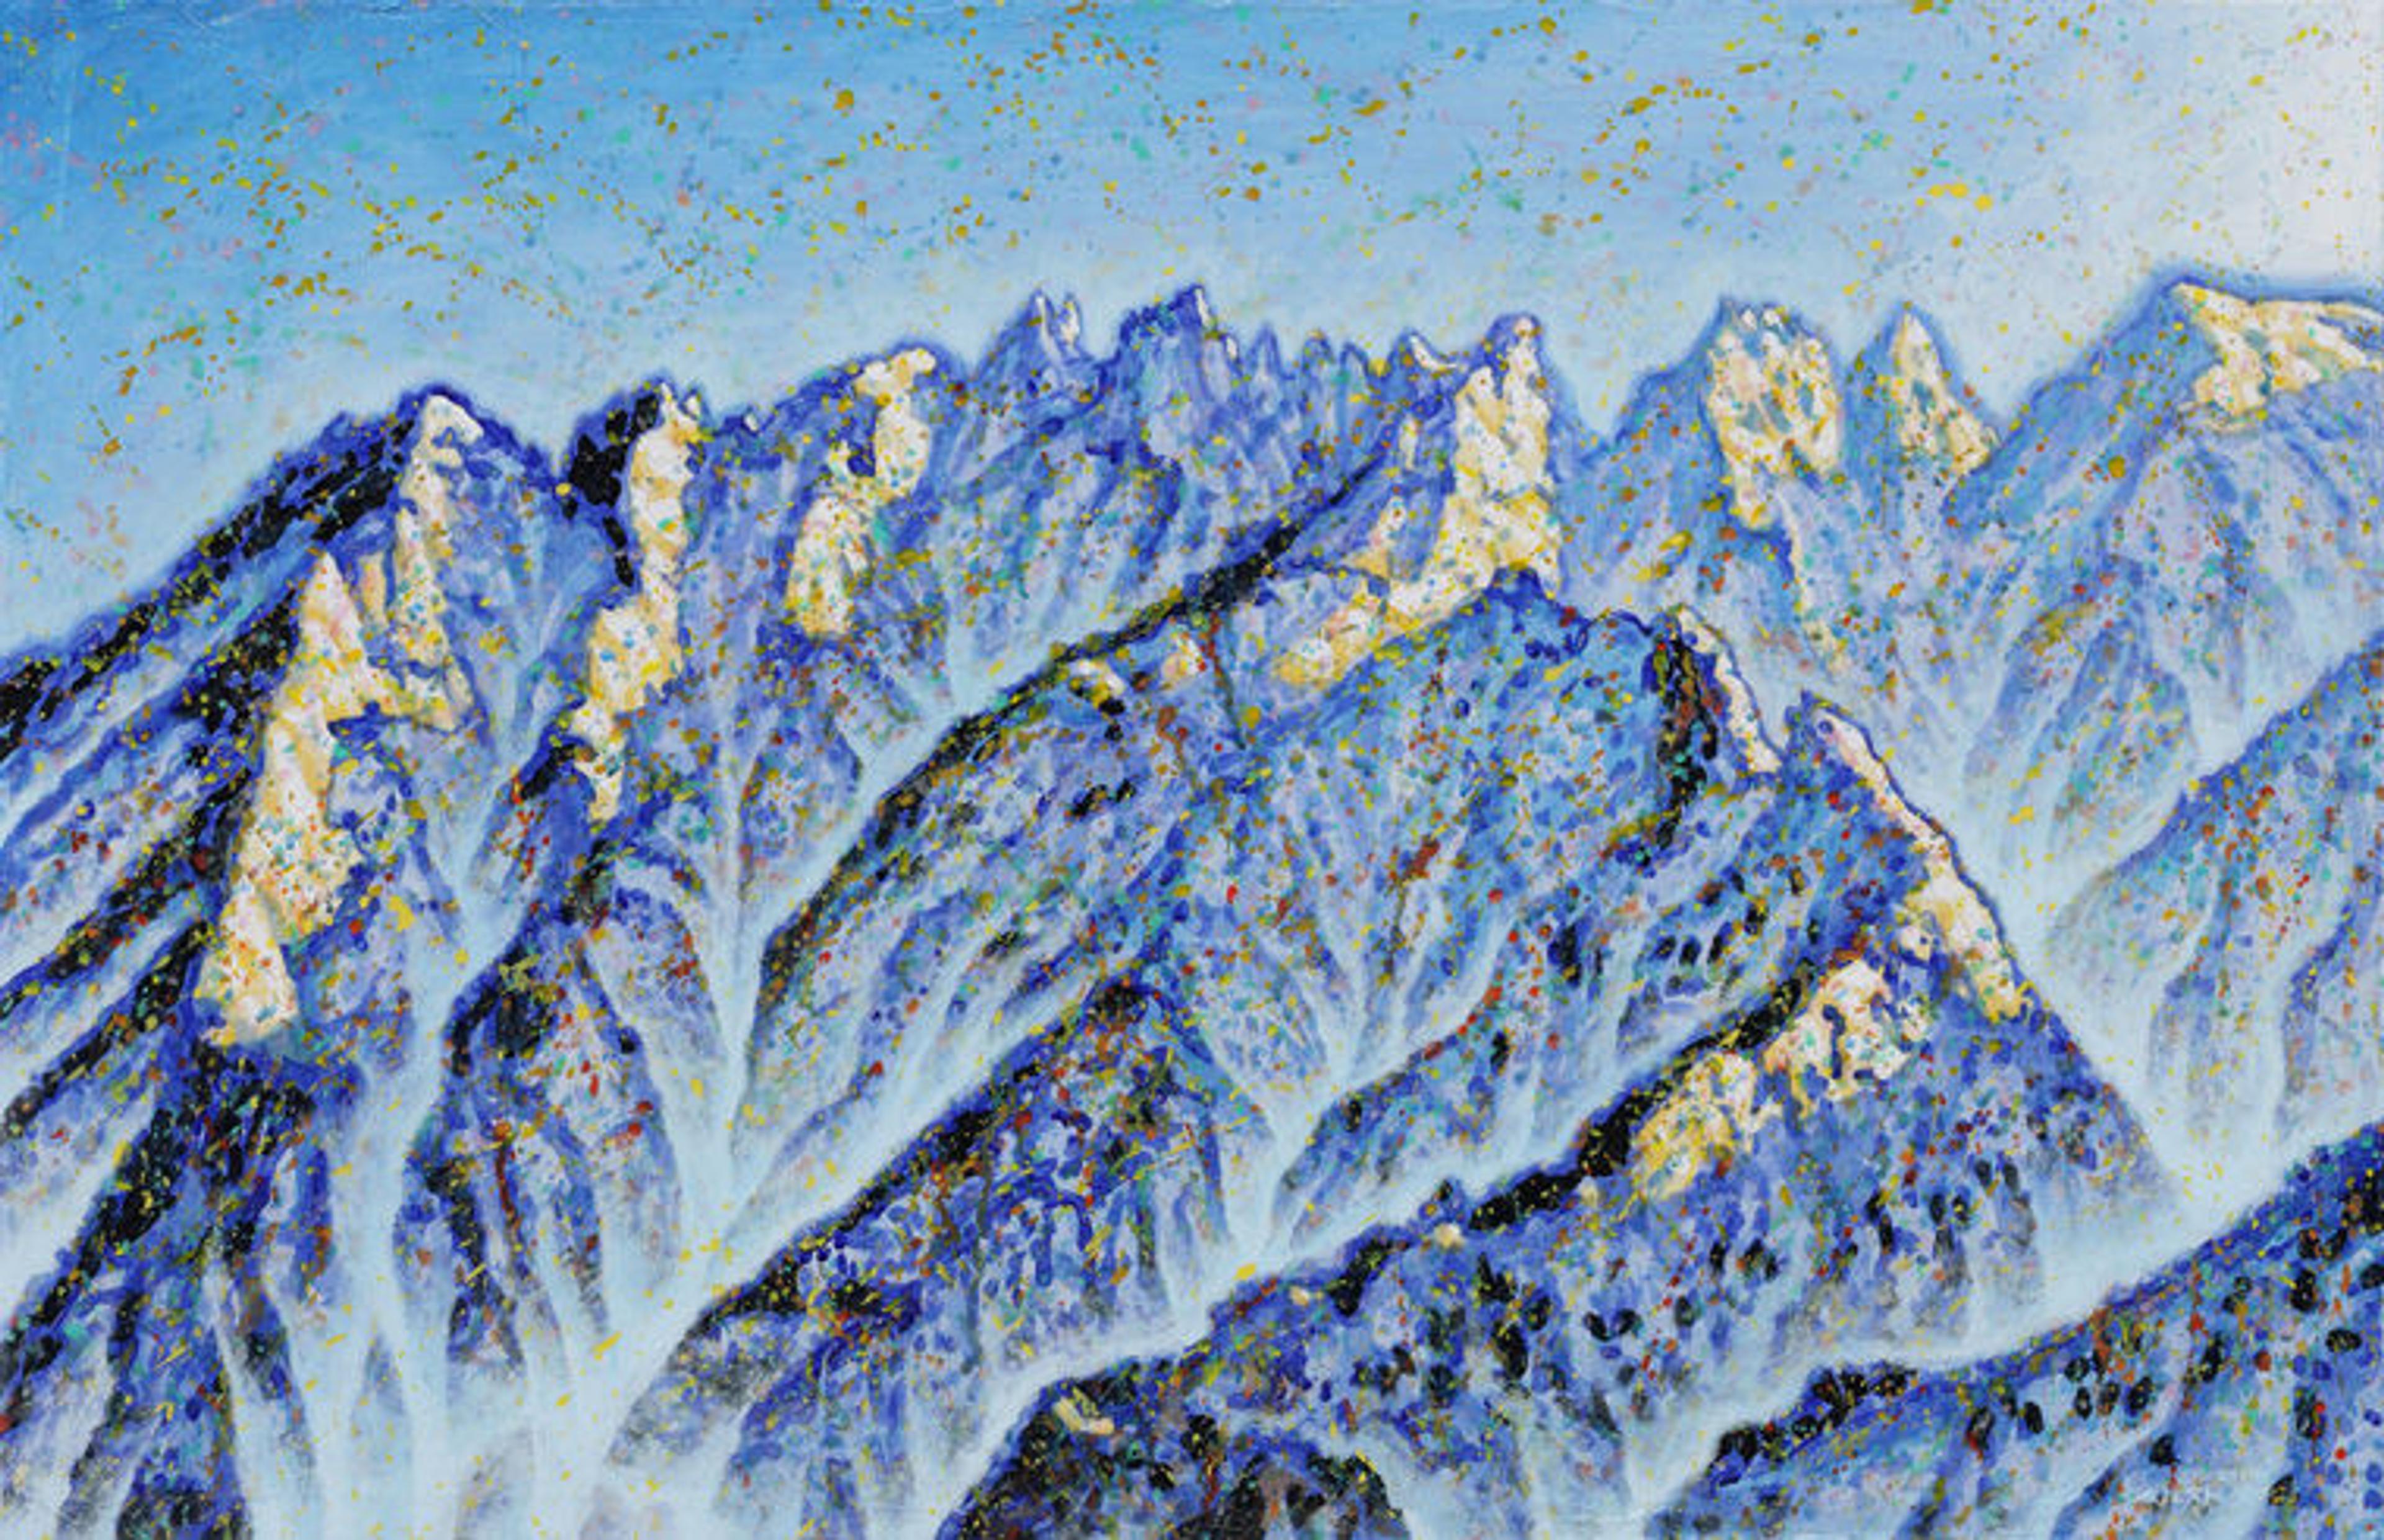 Painting of the Cheonhwadae Peaks of Mount Geumgang by Shin Jangskik, using blue and white acrylic paint